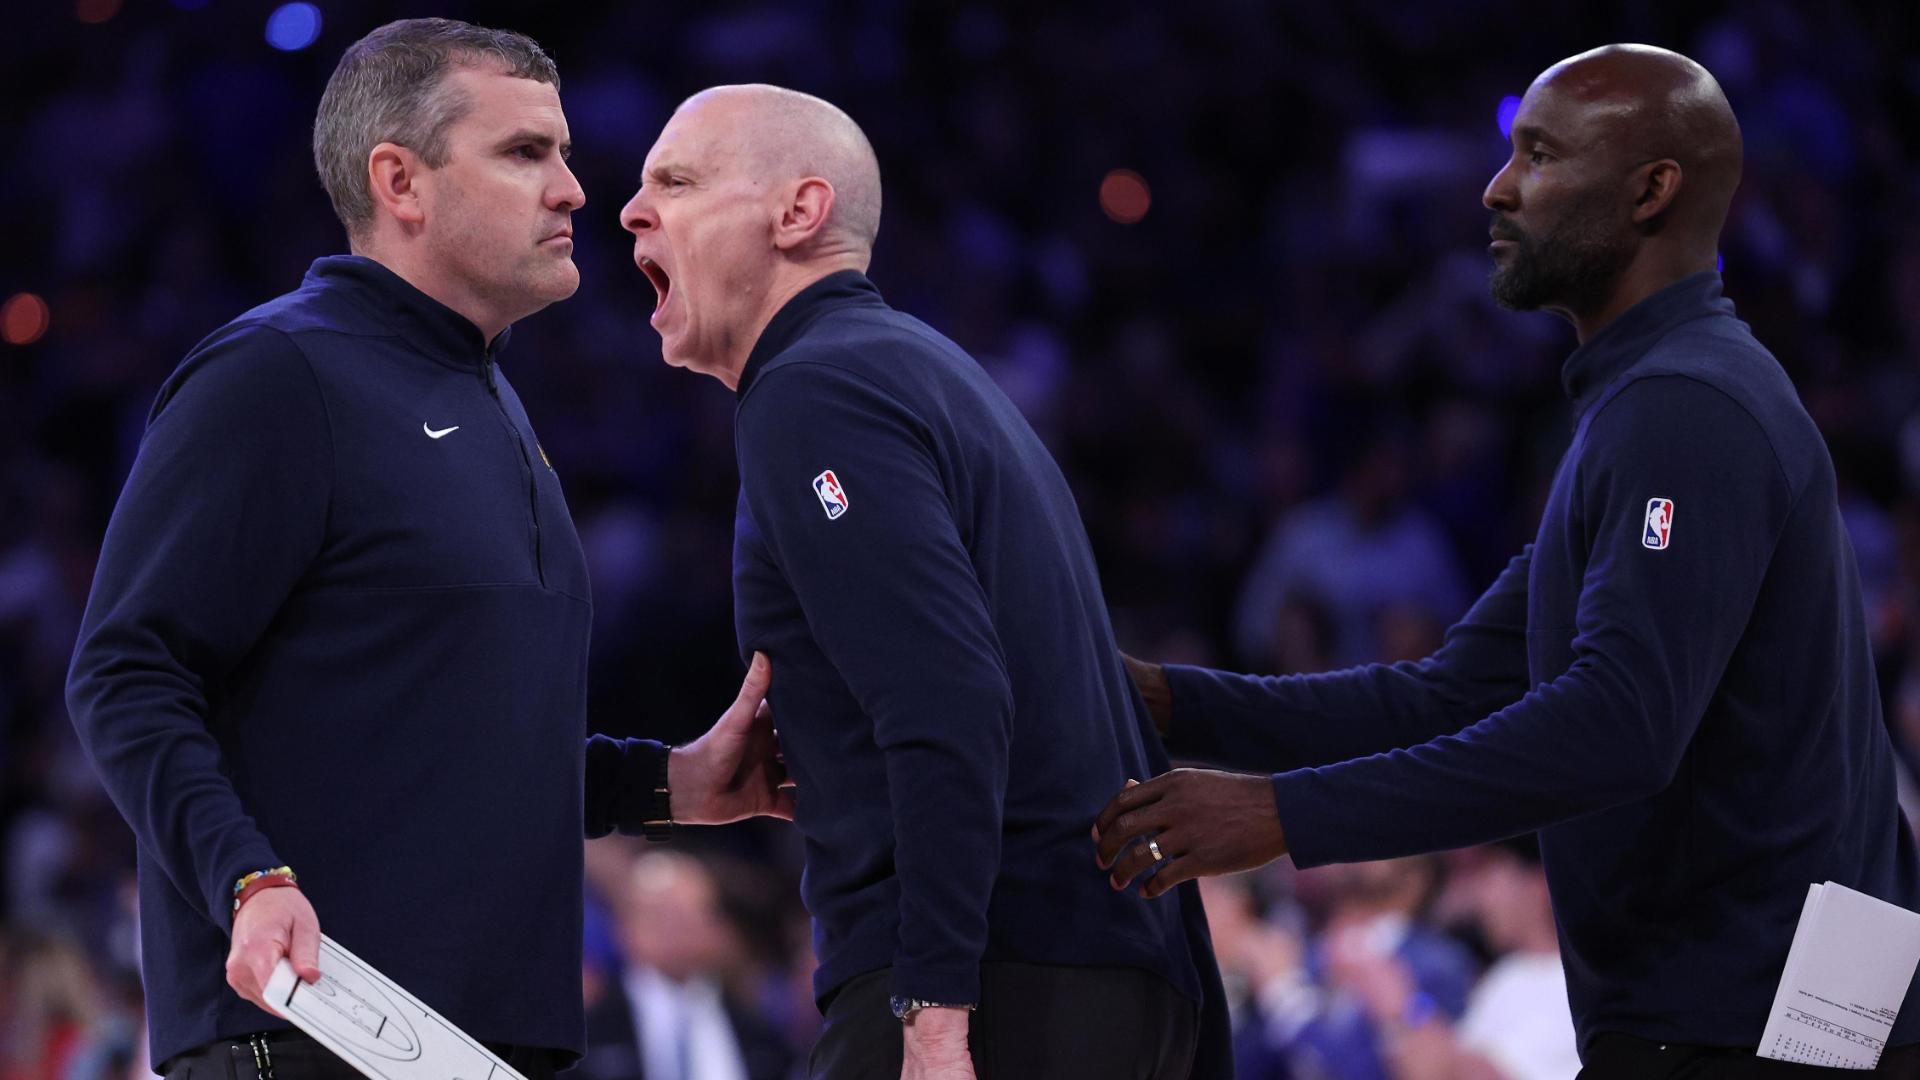 Rick Carlisle gets ejected for clapping in ref's face